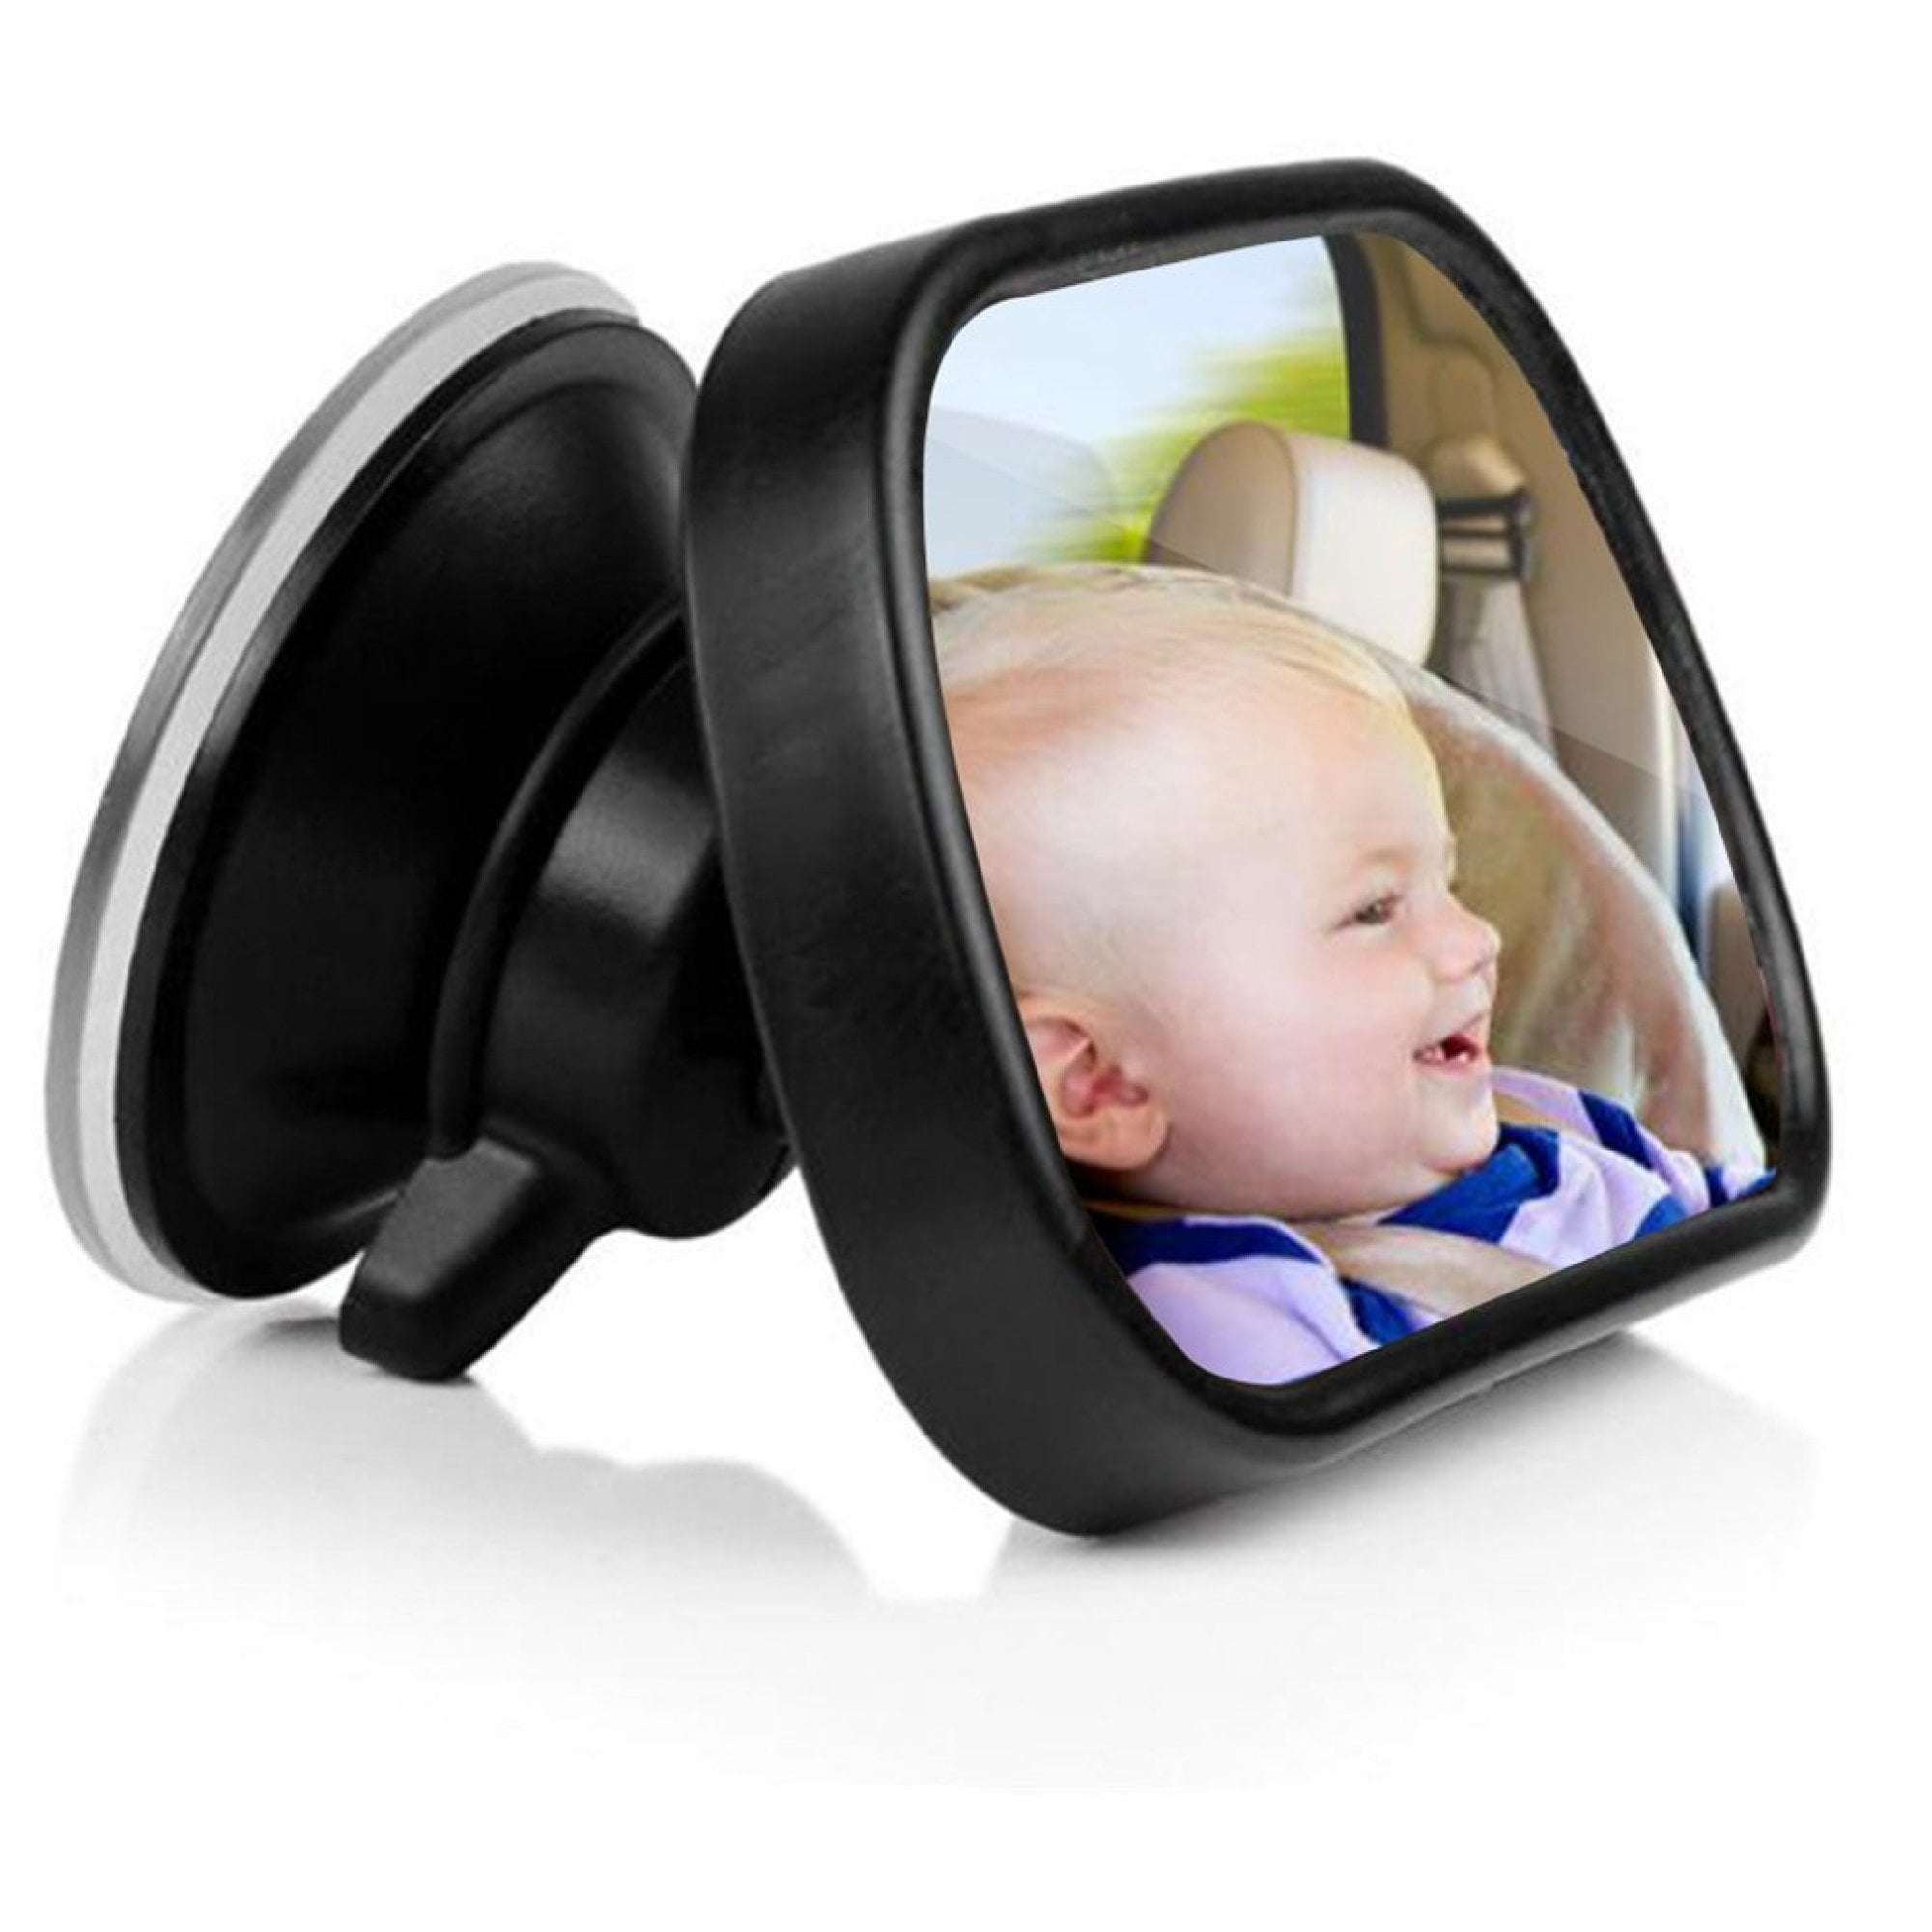 Universal Car Rear Seat View Mirror Baby Child Safety With Clip and Sucker 